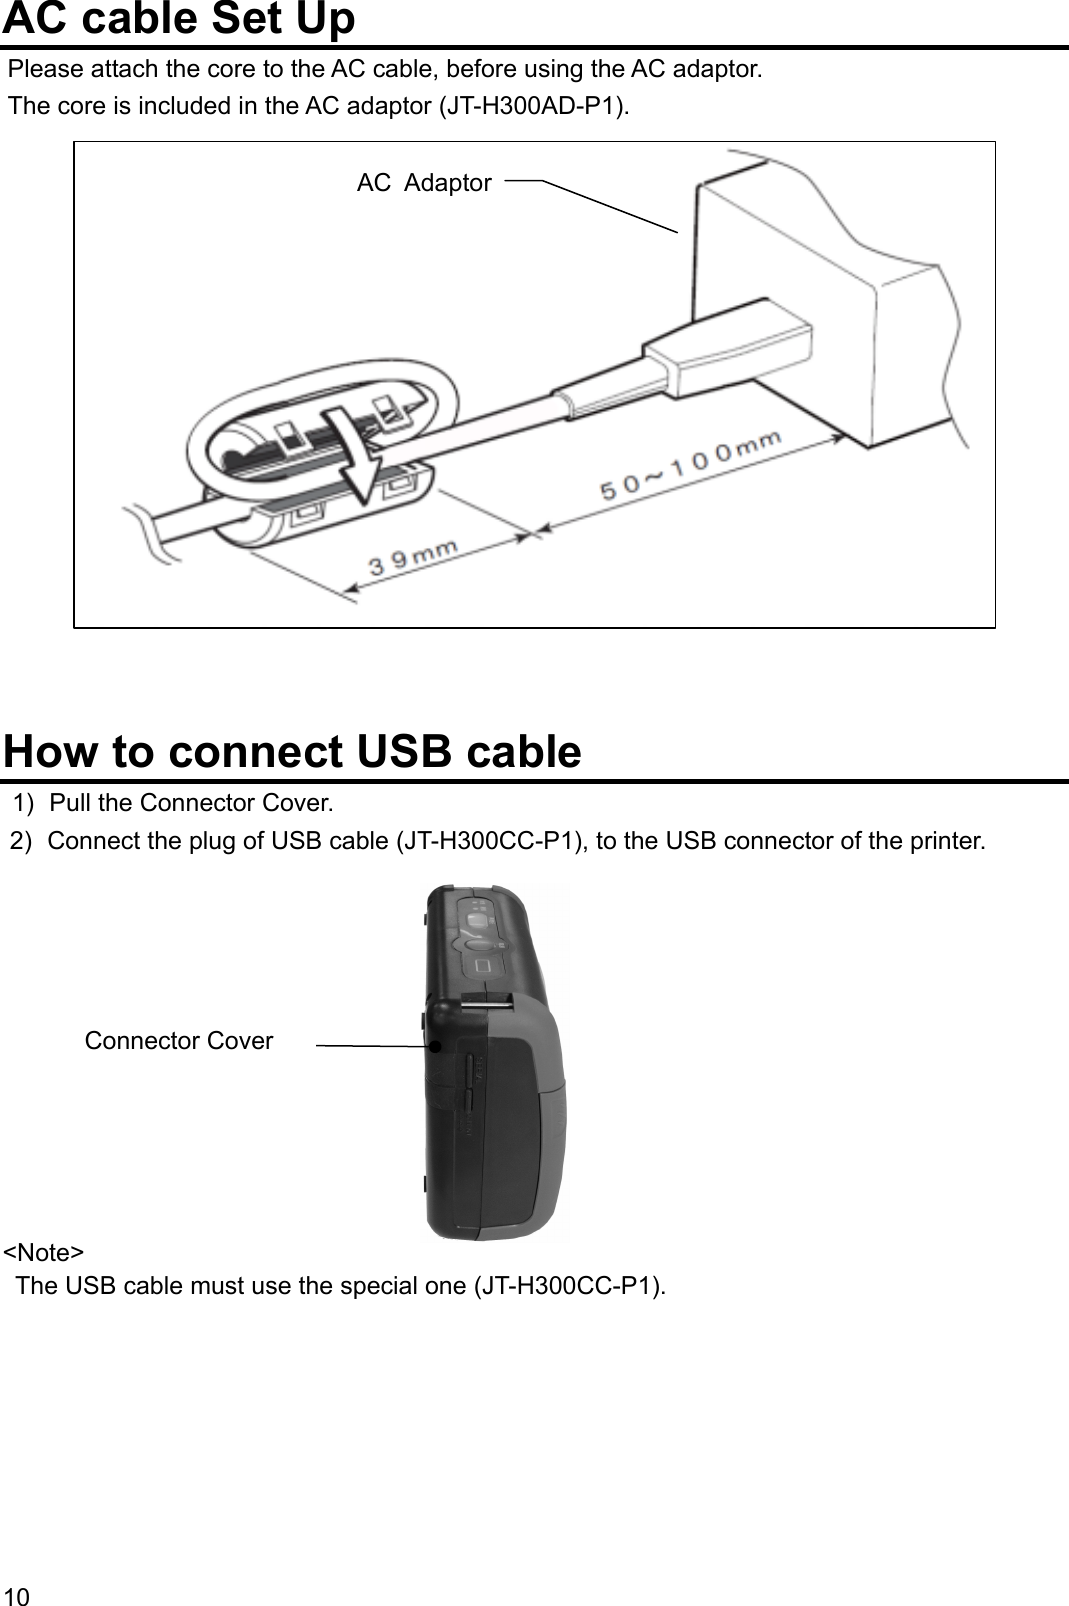 AC cable Set Up Please attach the core to the AC cable, before using the AC adaptor. The core is included in the AC adaptor (JT-H300AD-P1).  AC Adaptor               How to connect USB cable 1)  Pull the Connector Cover. 2)  Connect the plug of USB cable (JT-H300CC-P1), to the USB connector of the printer.           &lt;Note&gt; Connector Cover   The USB cable must use the special one (JT-H300CC-P1).    10  